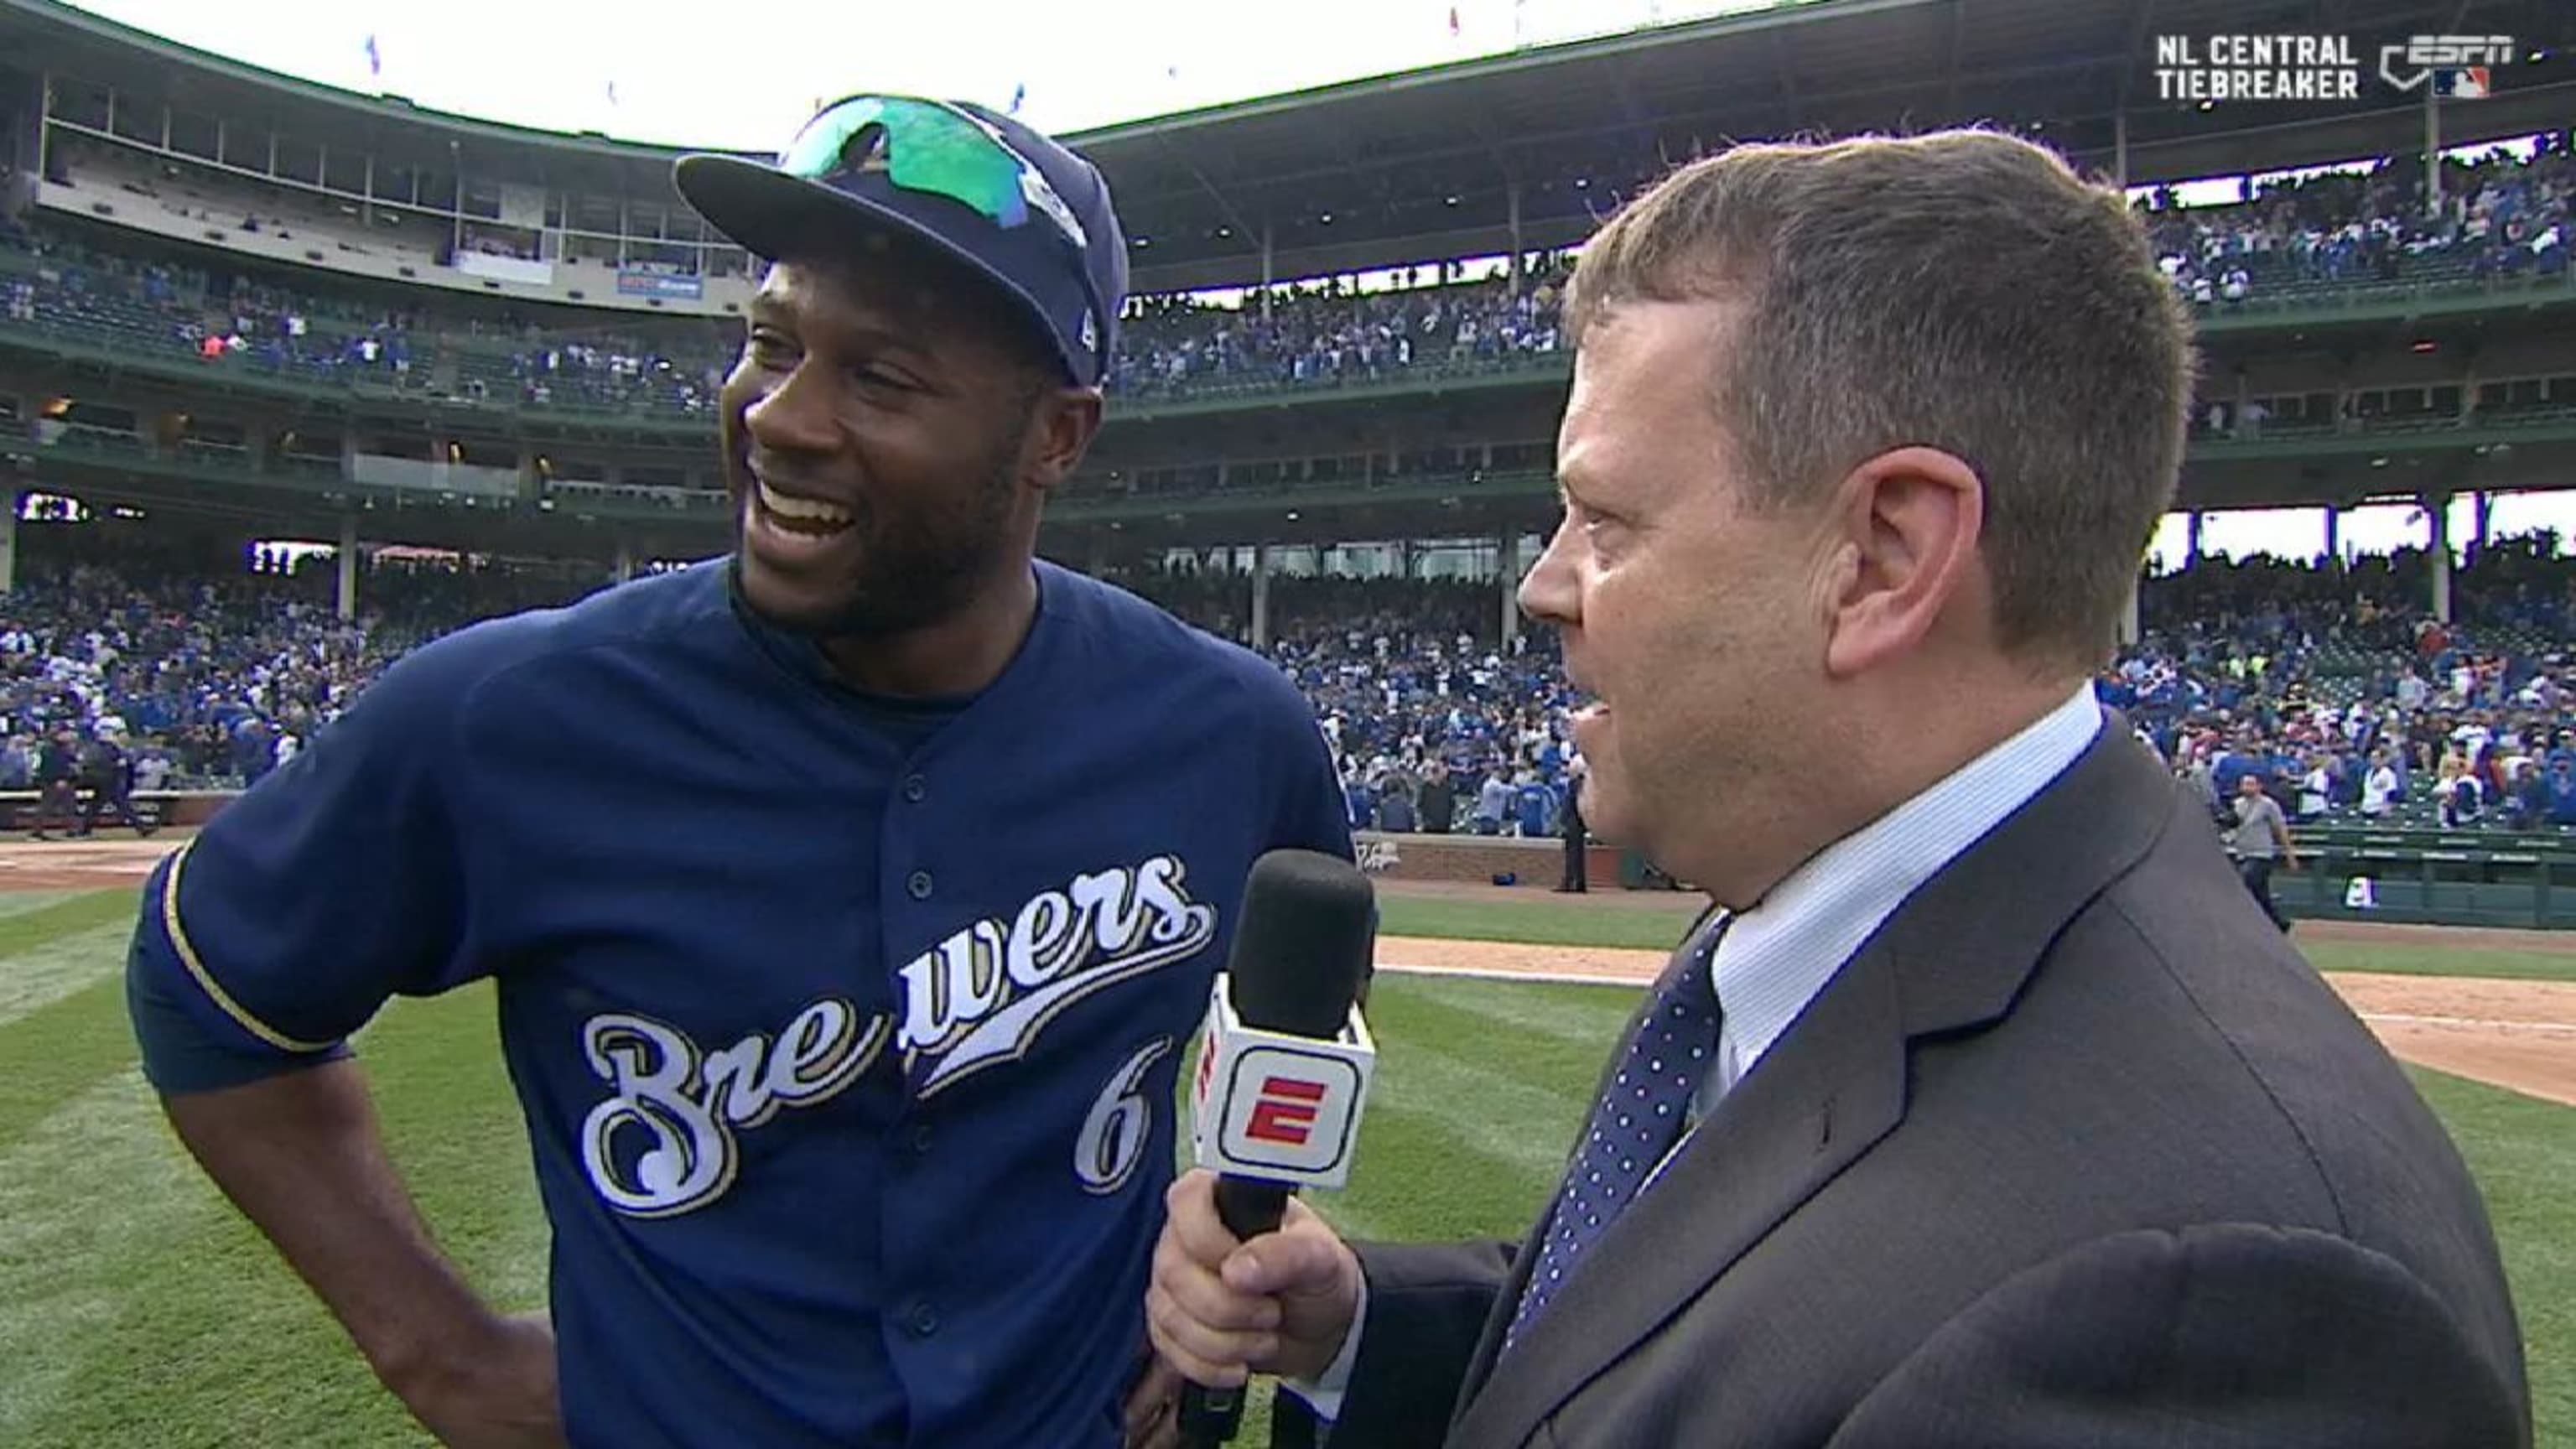 Lorenzo Cain is back. He tells us what life has been like this